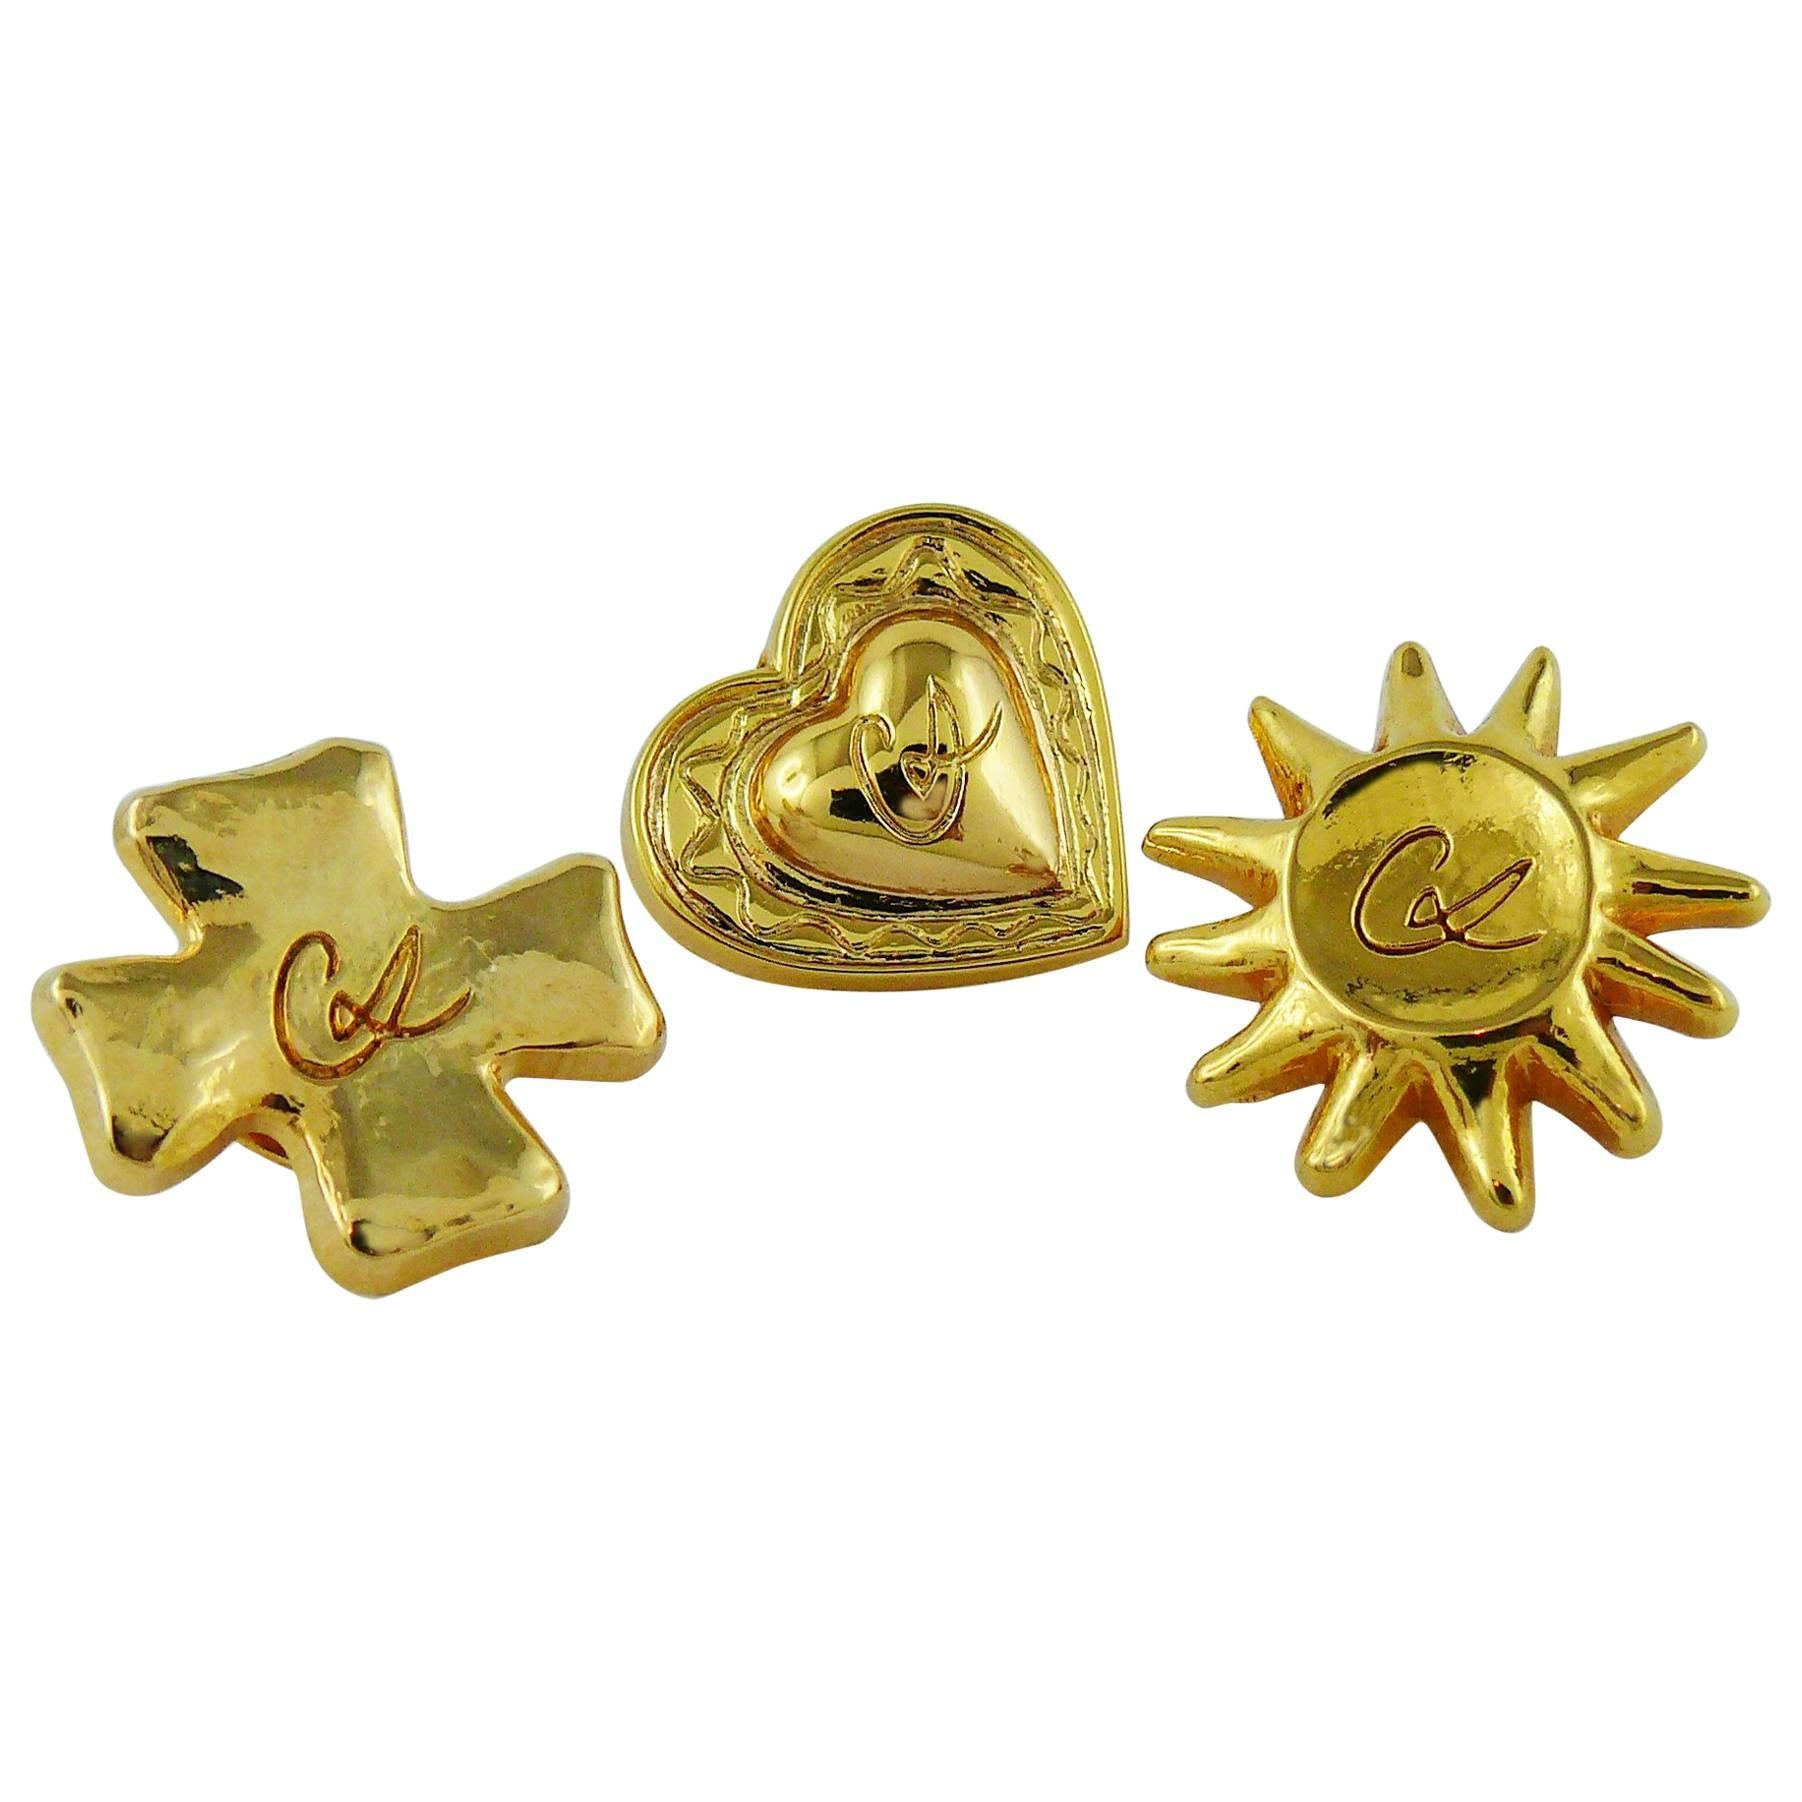 Christian Lacroix Vintage Iconic Symbols Pin Brooches